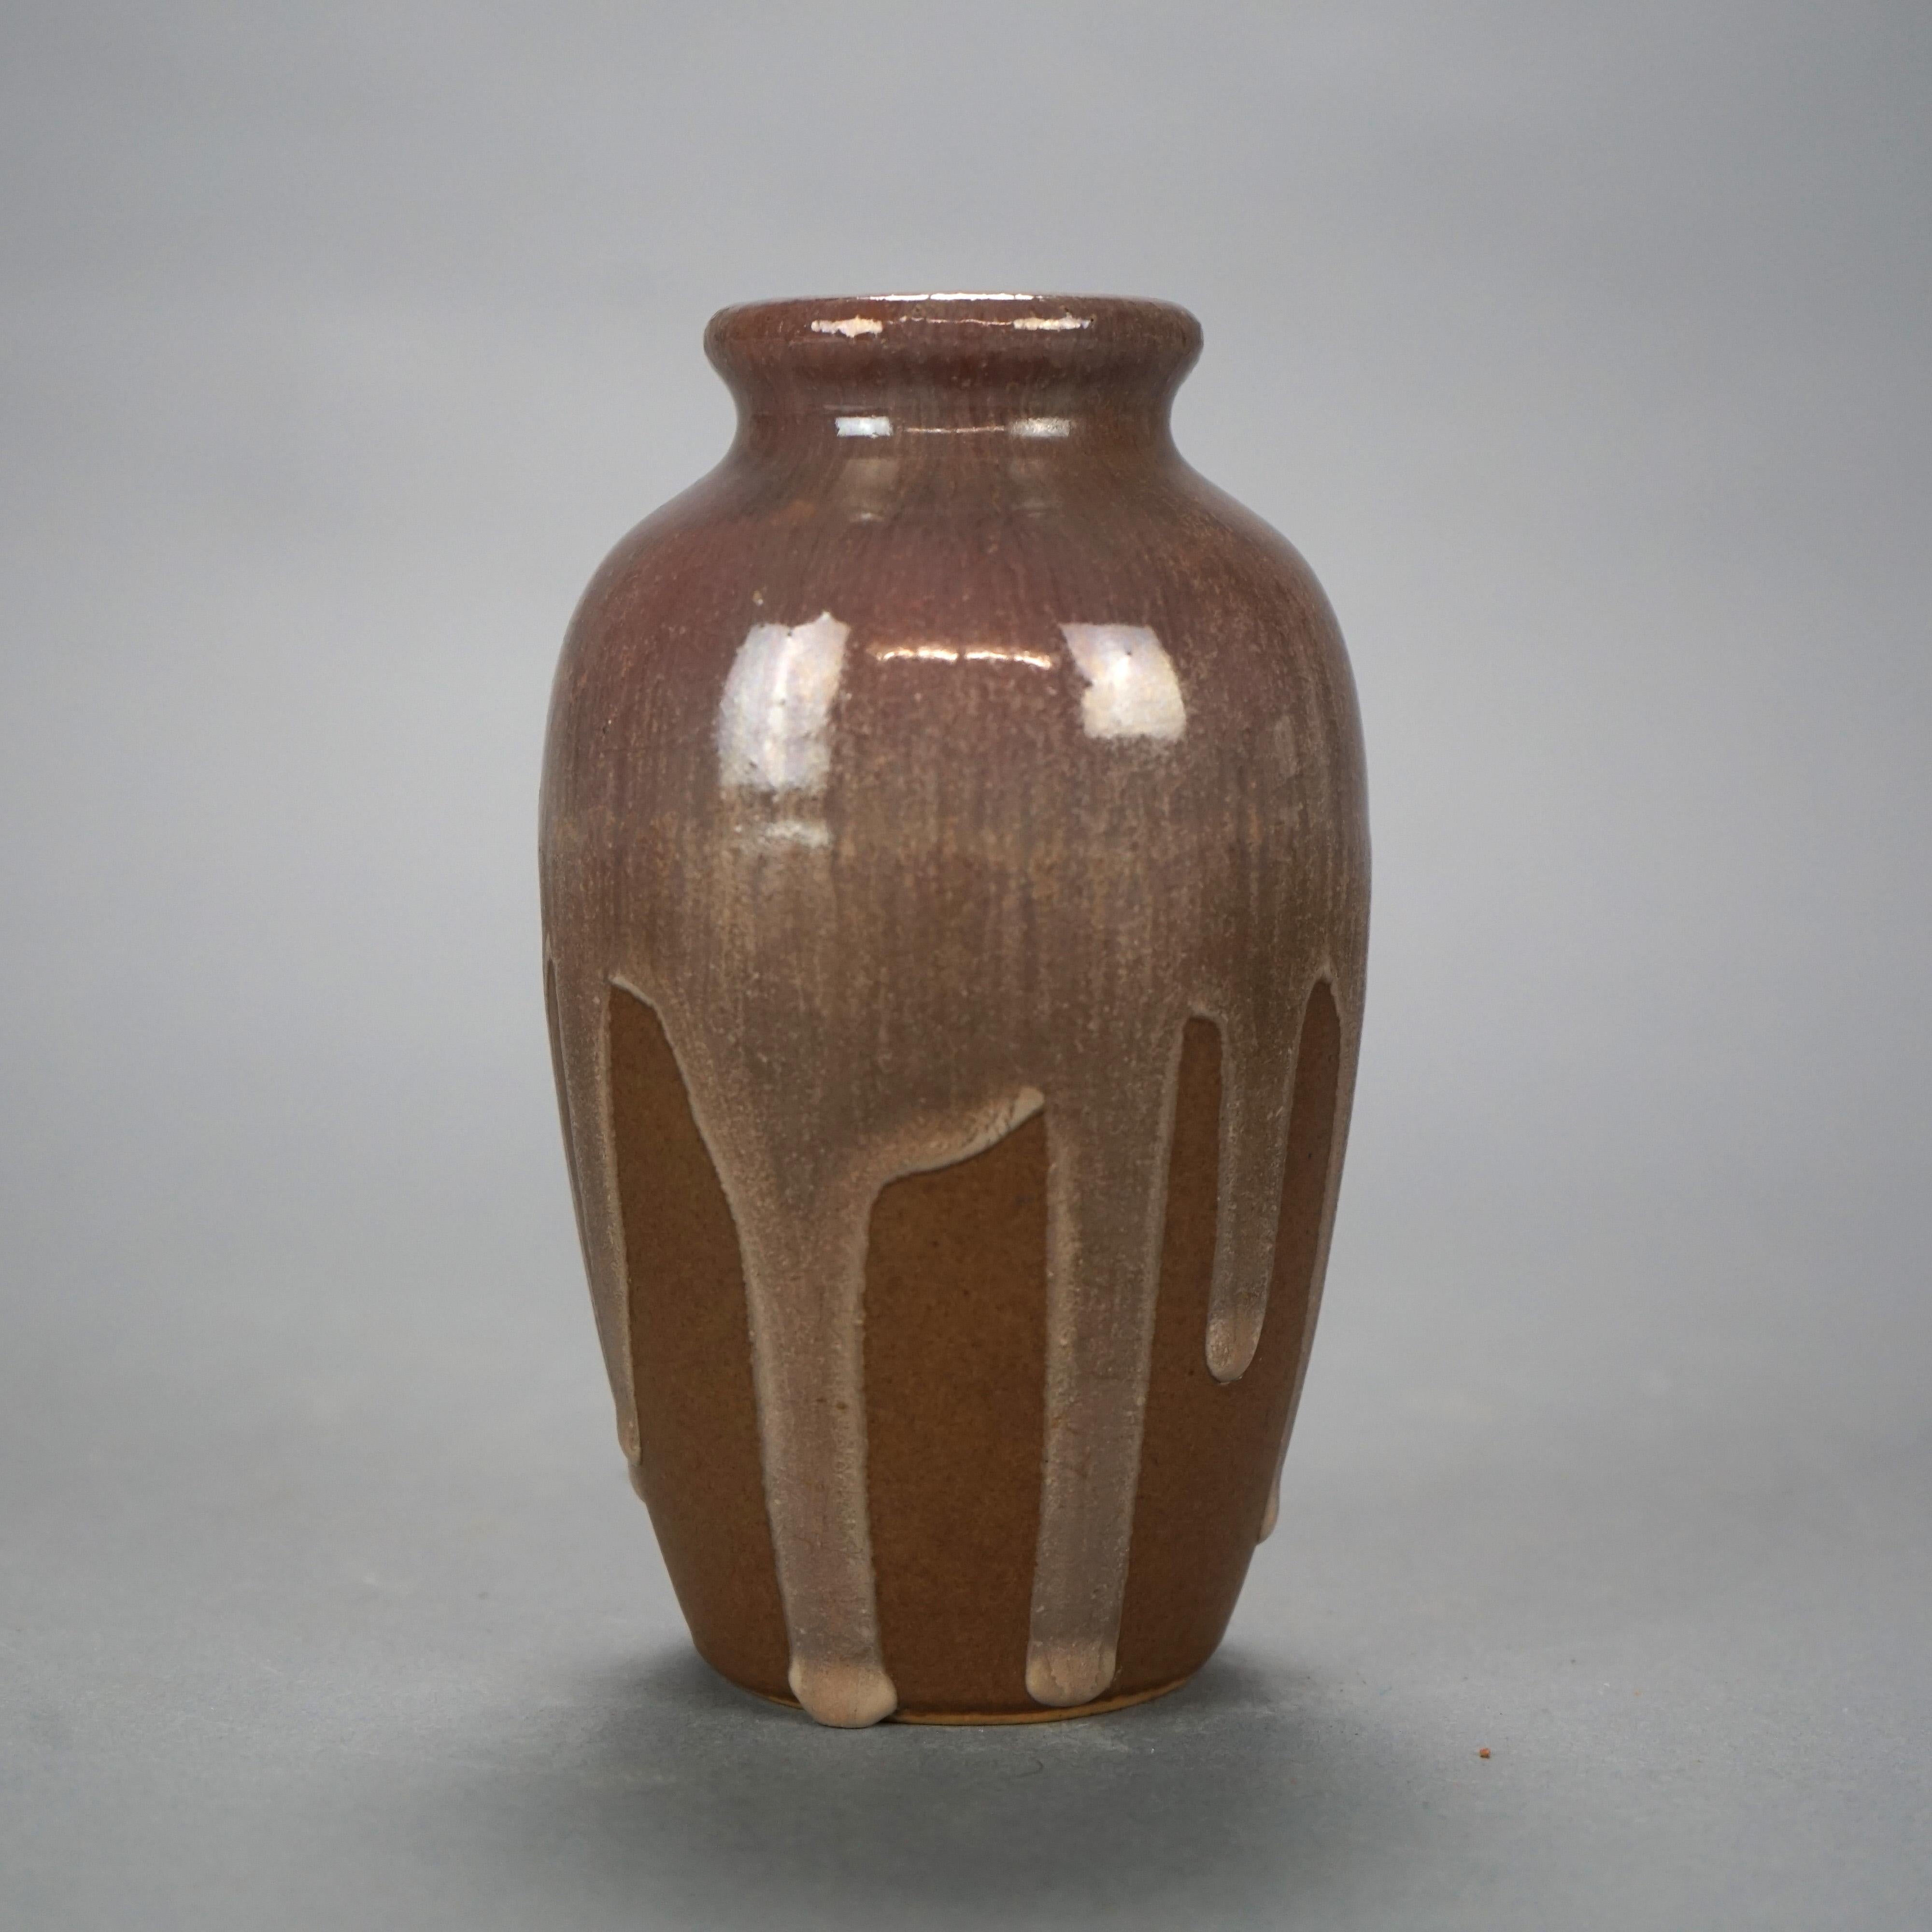 An antique Arts and Crafts vase by Fulper offers art pottery construction with drip glaze finish, maker mark on base as photographed, c1930.

Measures- 6''H x 3.5''W x 3.5''D.